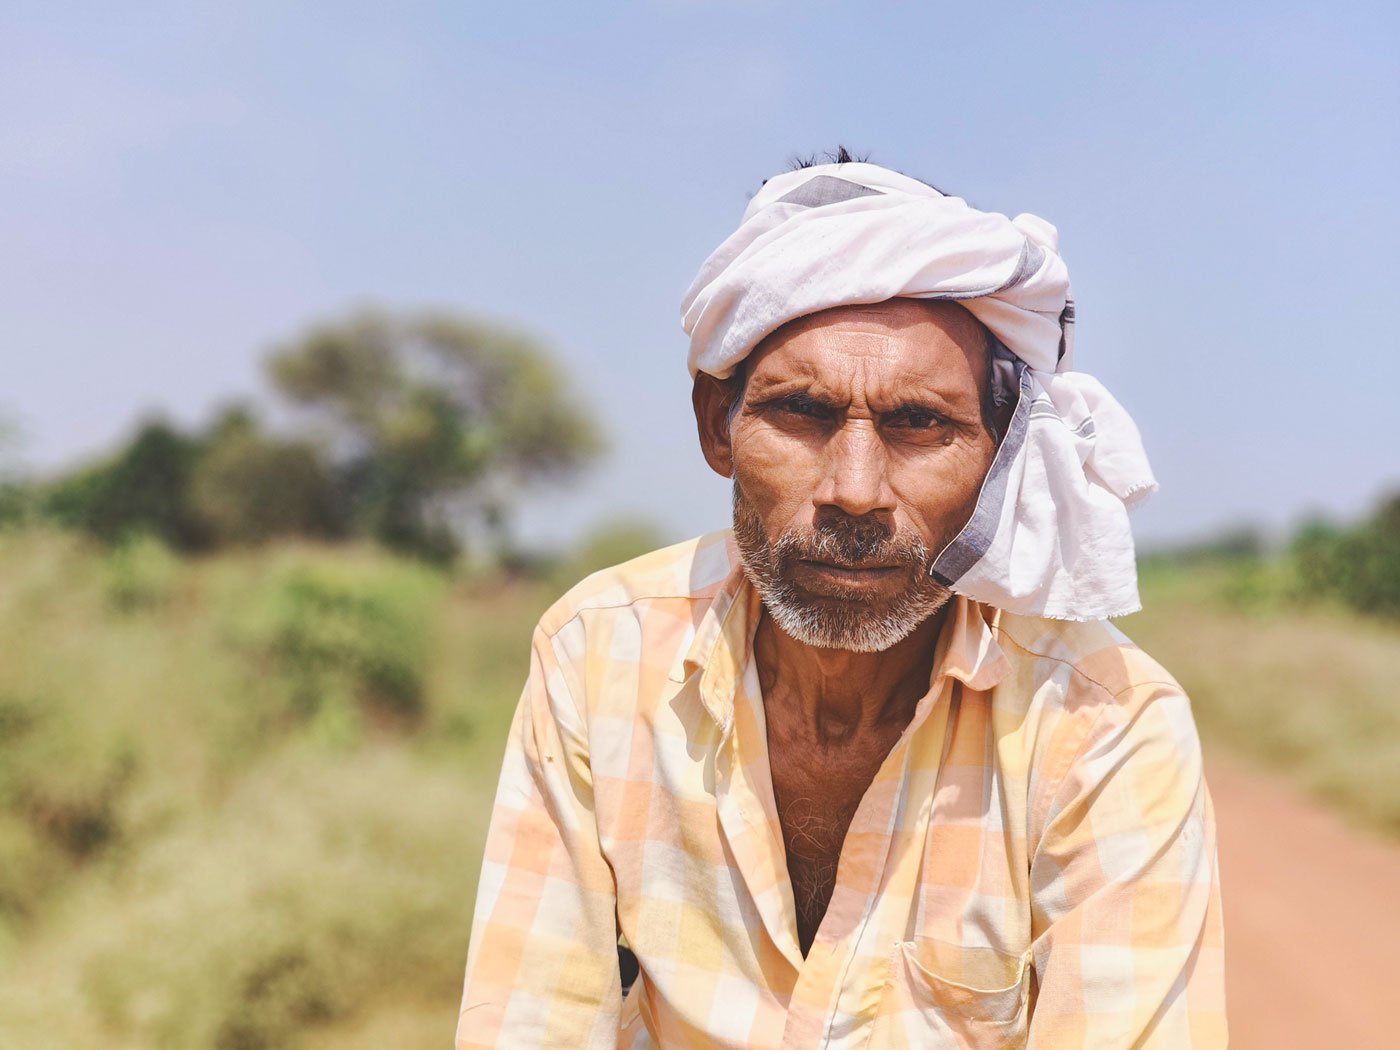 Ashok Jatav, a farm labourer from Khorghar, Madhya Pradesh was falsely declared dead and stopped receiving the Pradhan Mantri Kisan Samman Nidhi . Multiple attempts at rectifying the error have all been futile